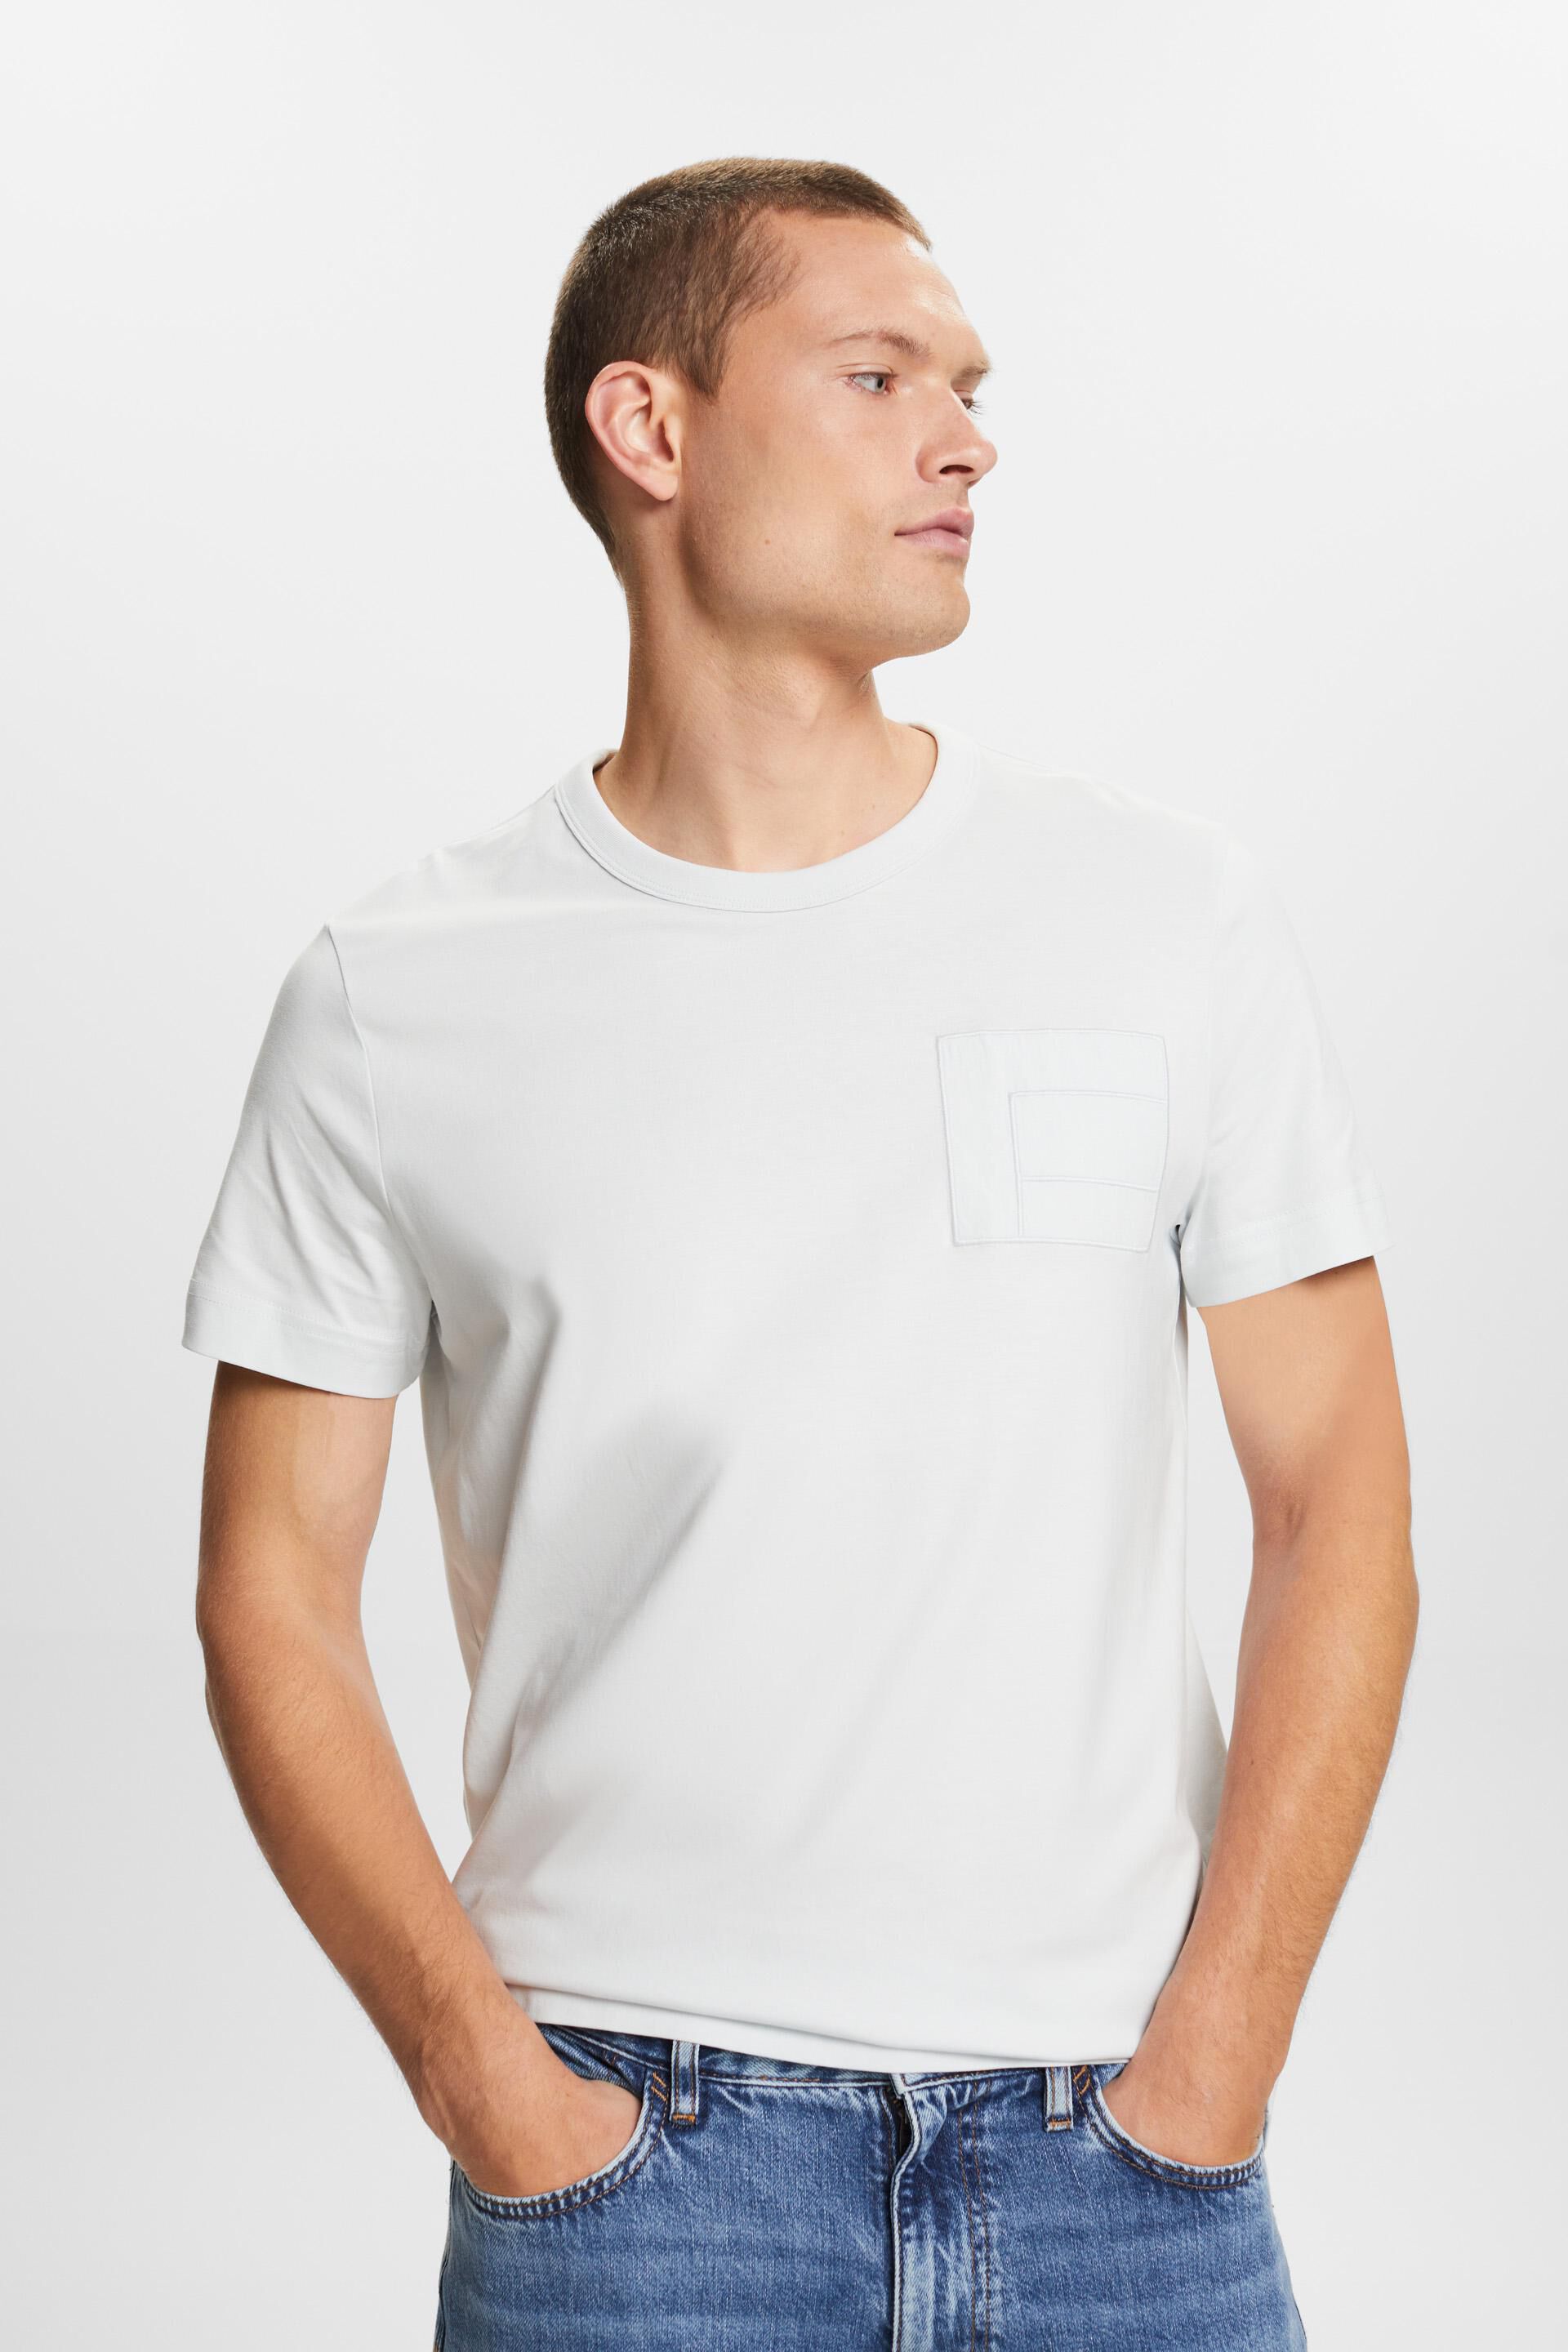 Esprit with 100% cotton embroidery, Jersey t-shirt